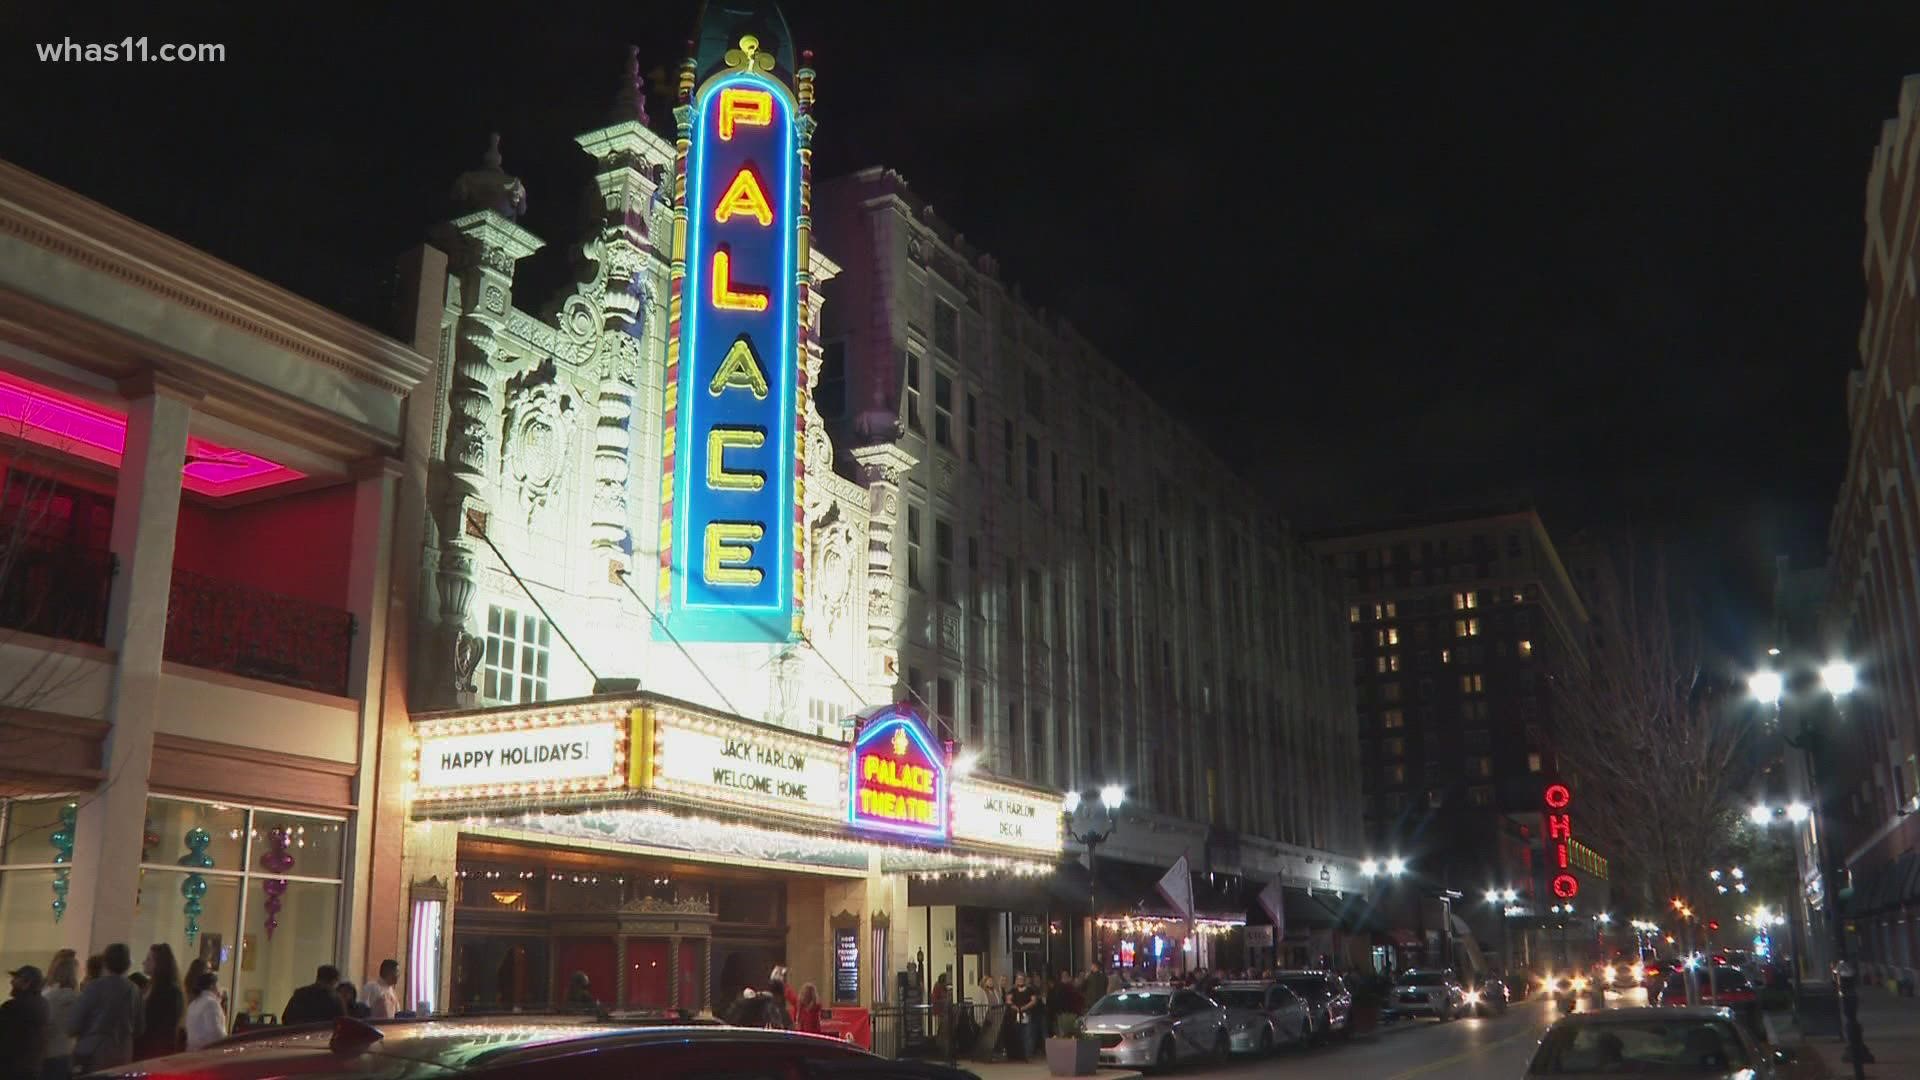 Harlow kicked off his local tour at the Louisville Palace. "We're proud of him," one concertgoer said Tuesday night.